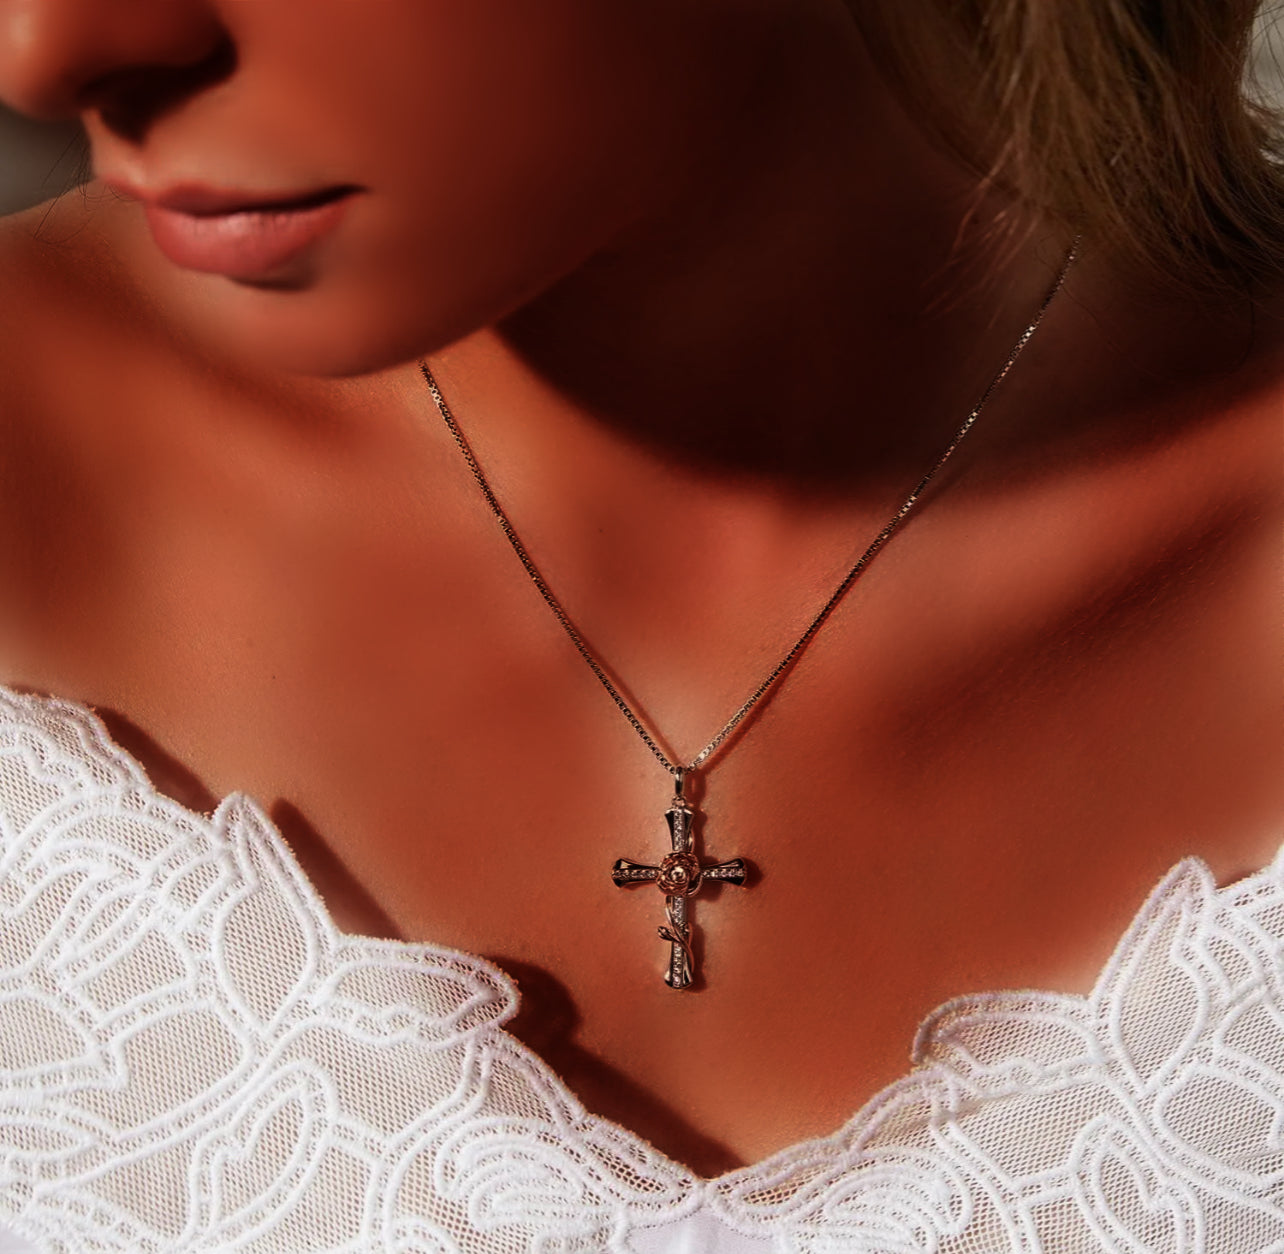 Rose Cross Necklace for Women 925 Sterling Silver Infinity Cross Pendant with Birthstone Cubic Zirconia, Cross Jewelry with Gift Box